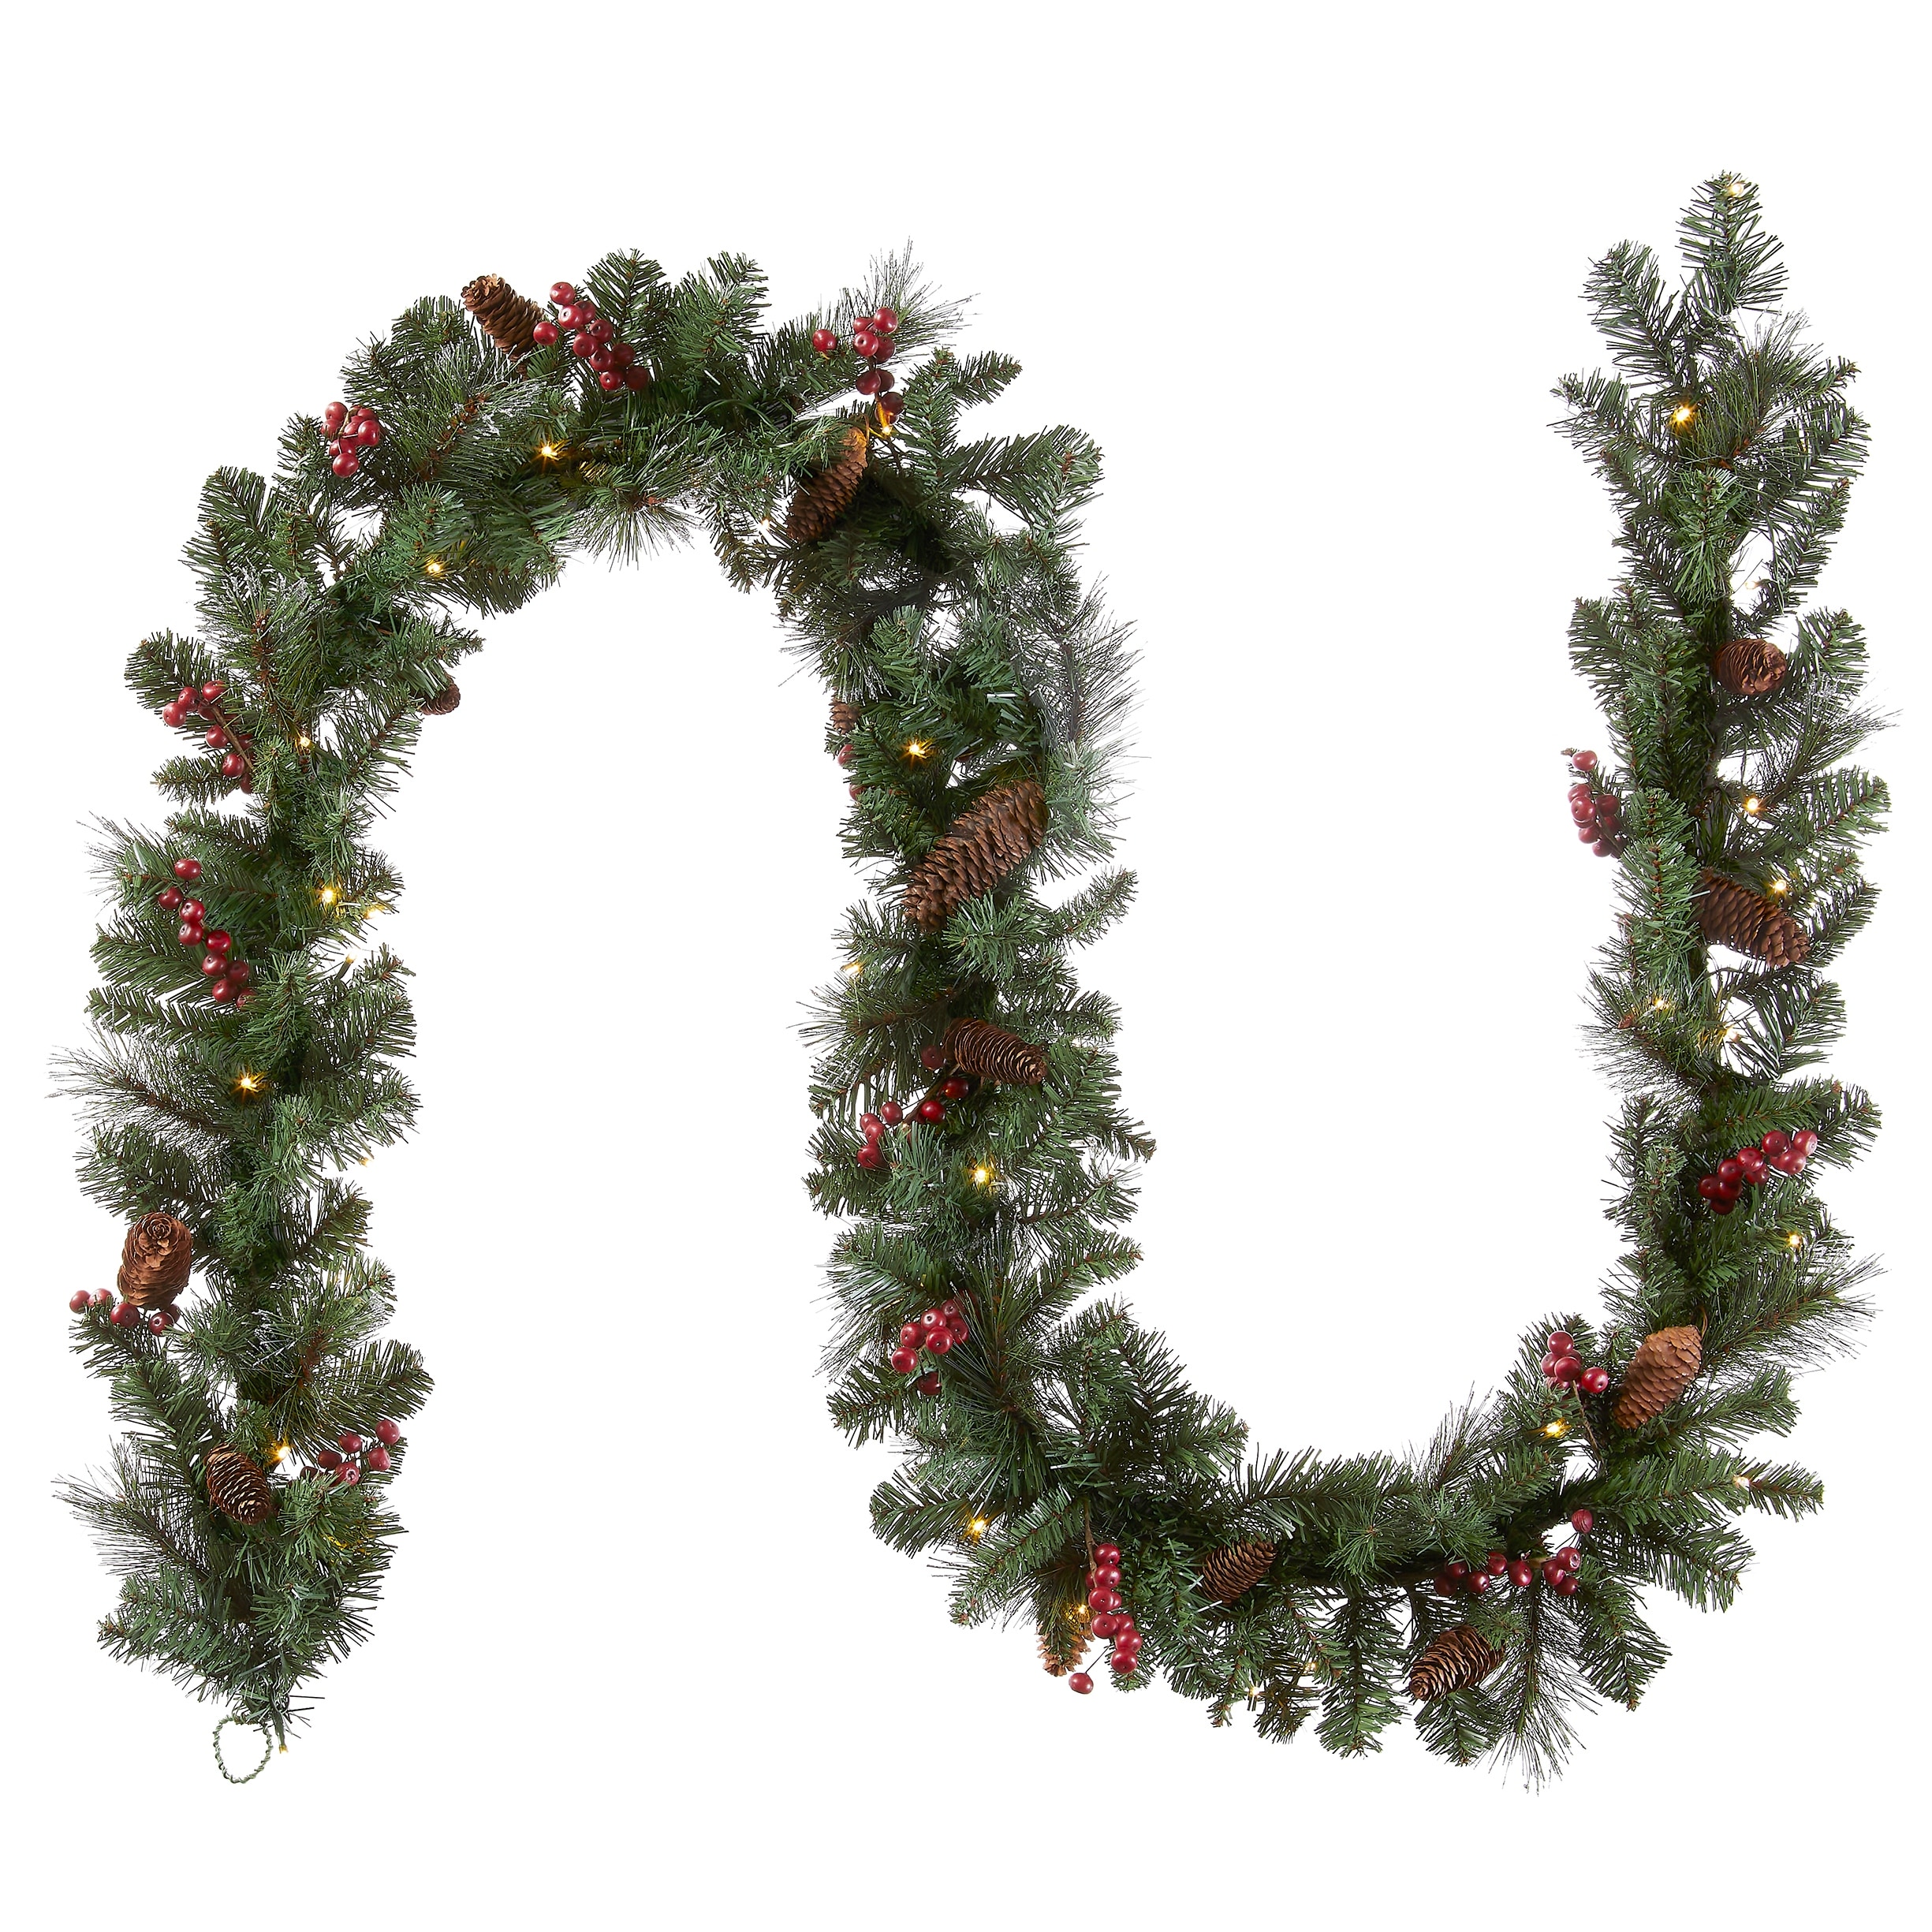 Faux Greenery Garland 73 x 4.5 – Decocrated